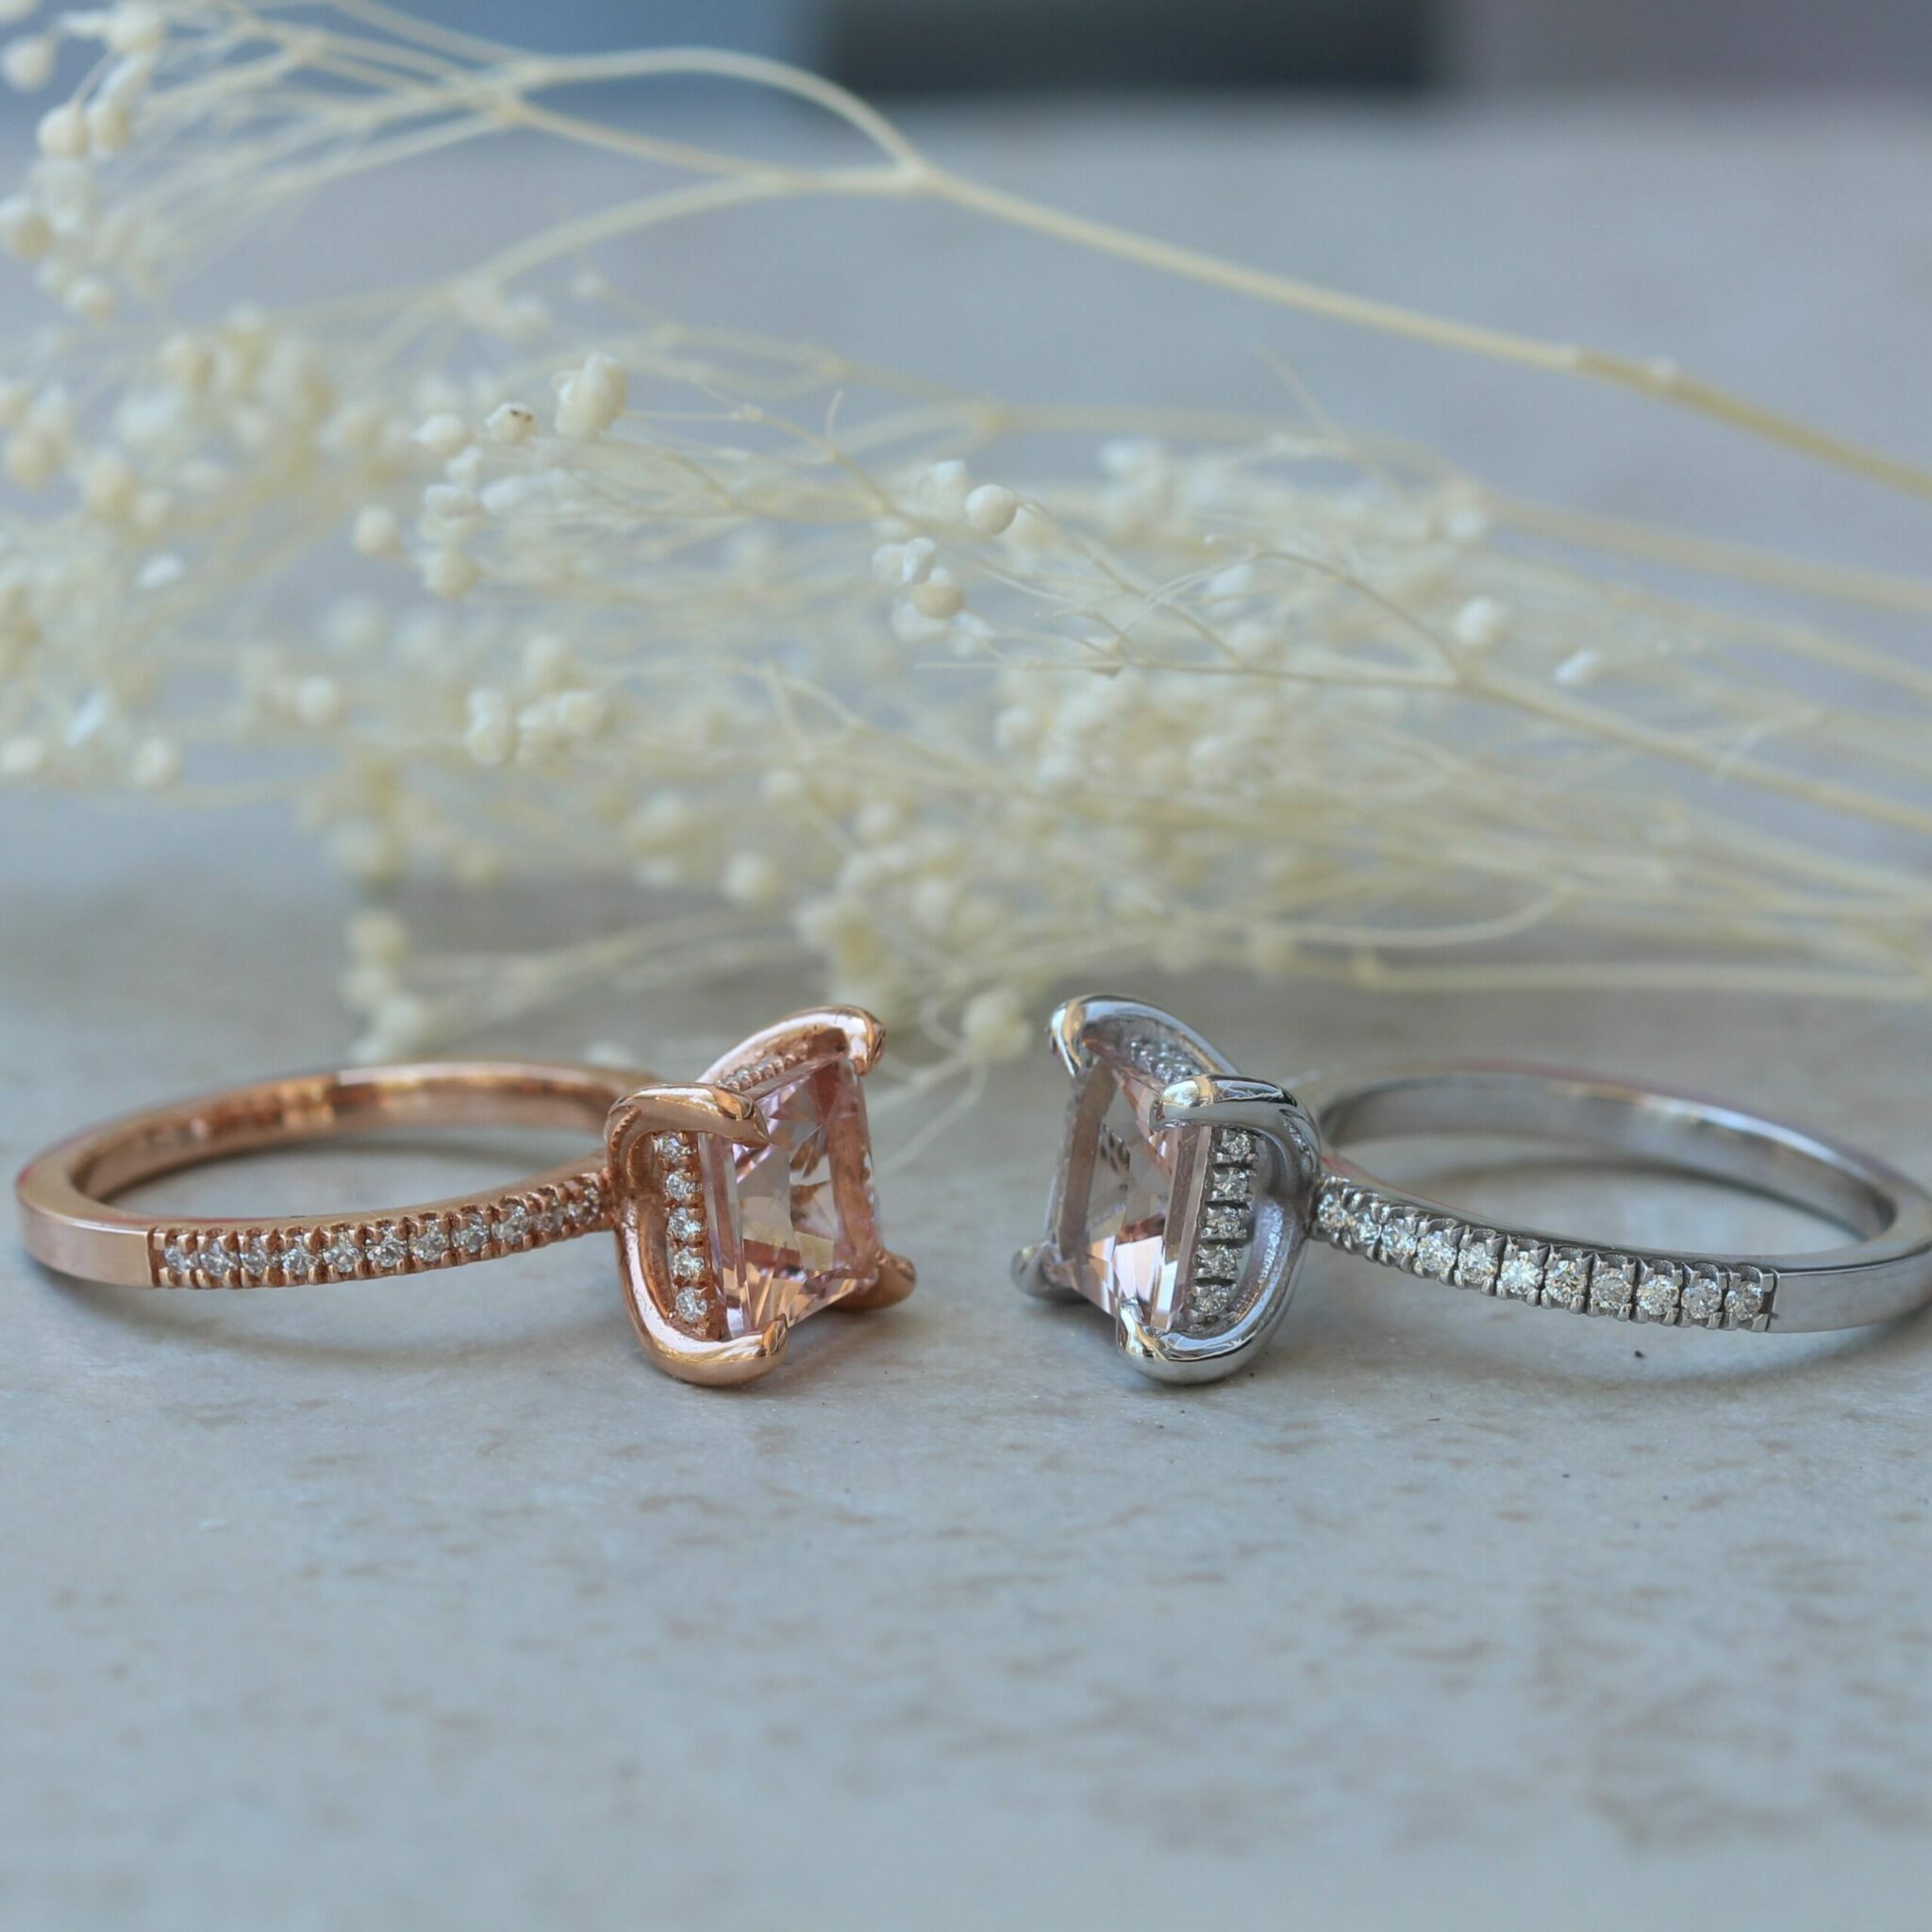 How-does-Morganite-look-in-rose-gold-versus-white-gold-LS5830-2